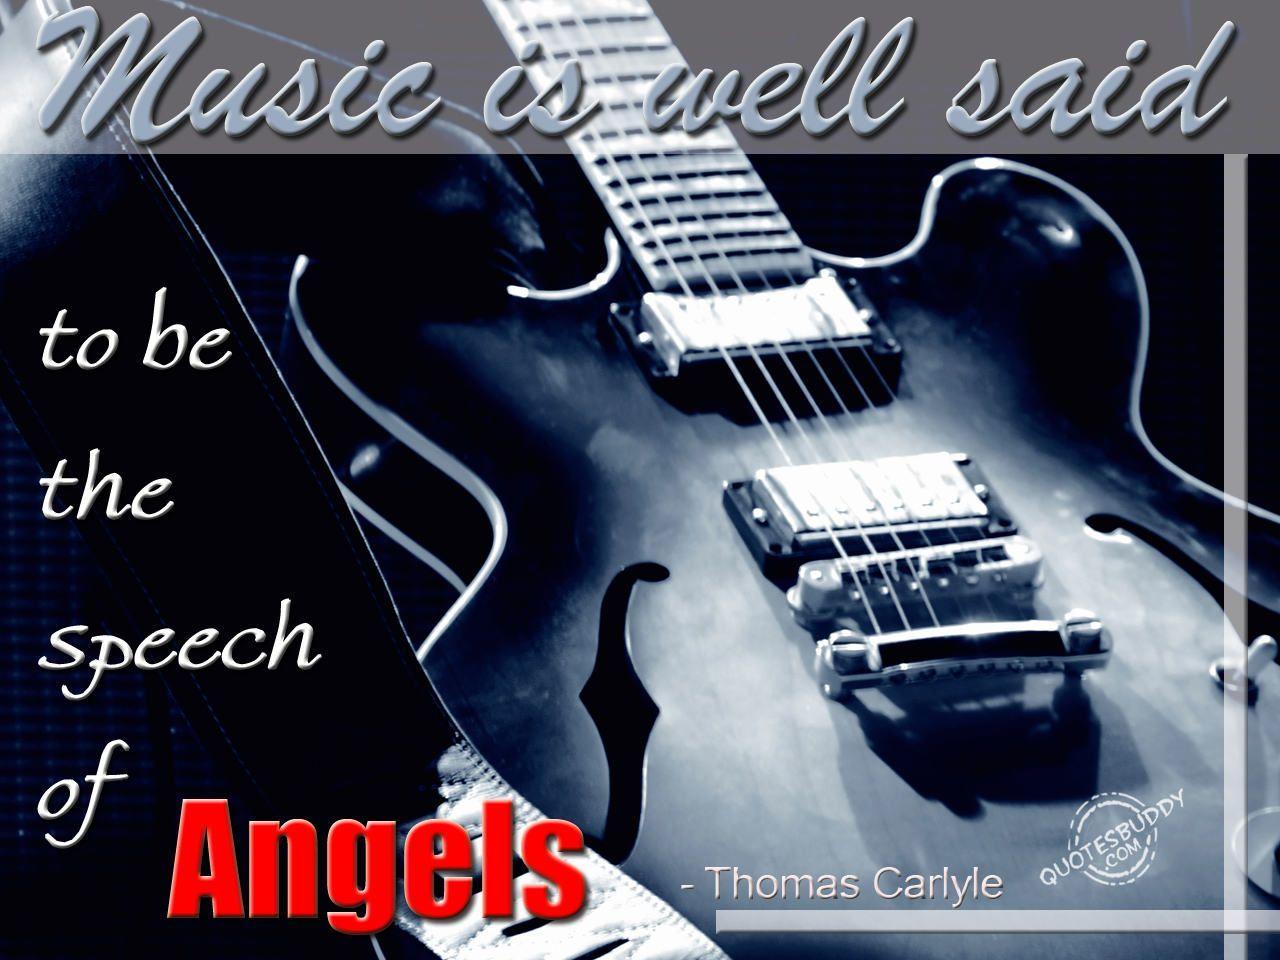 Music is well said to be the speech of angels, always loved this